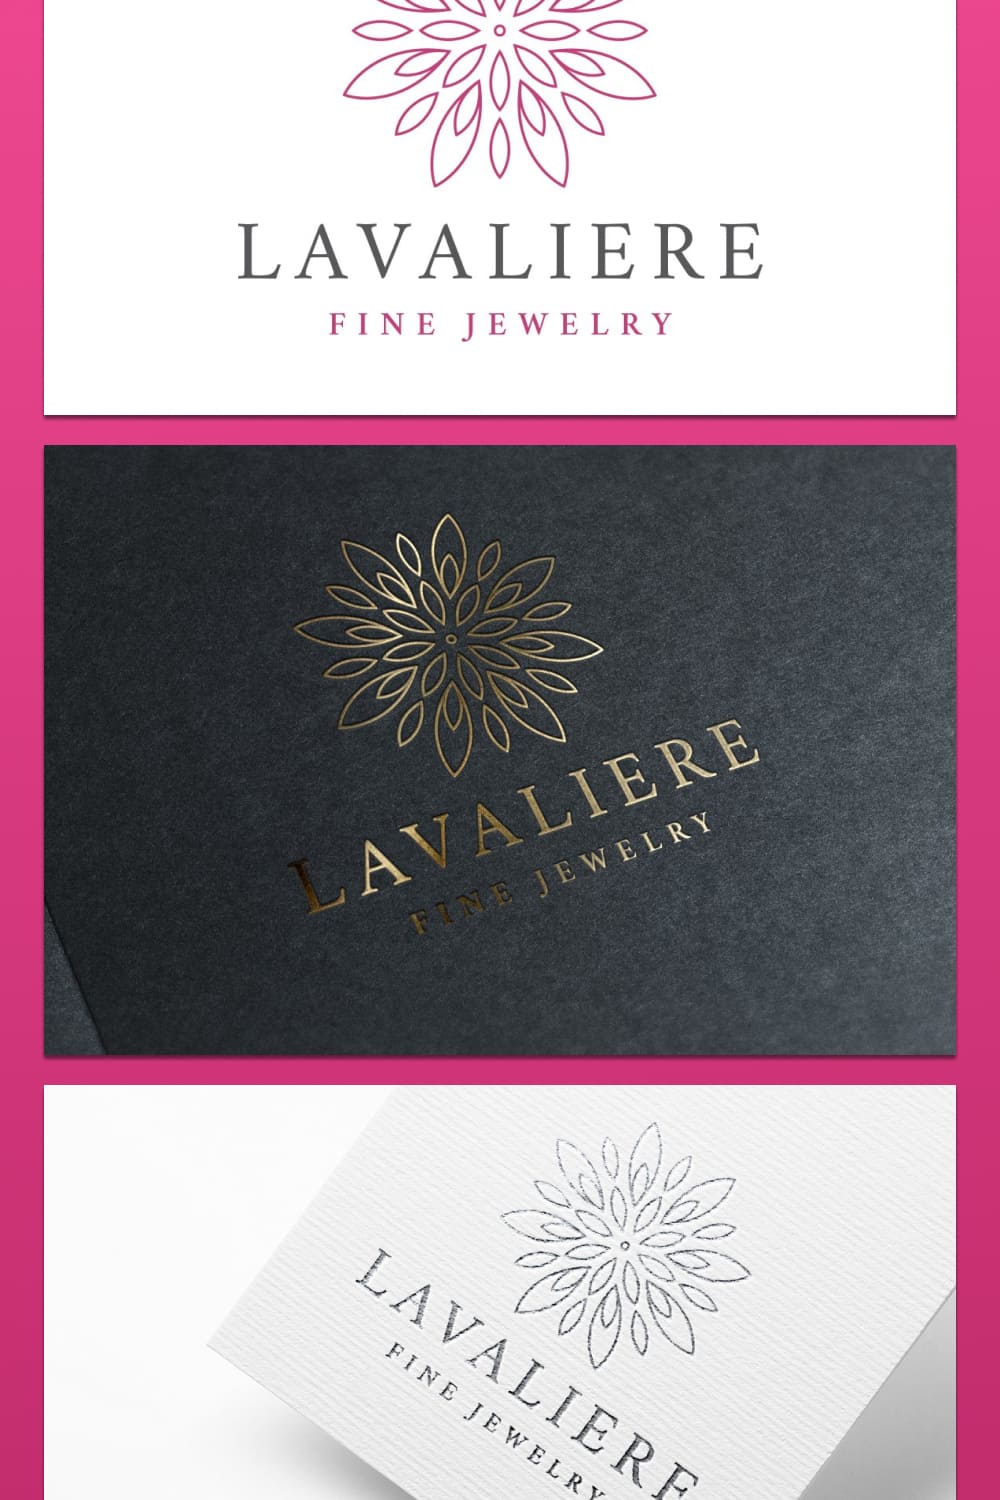 lavaliere jewelry logo template for any kind of jewelry.